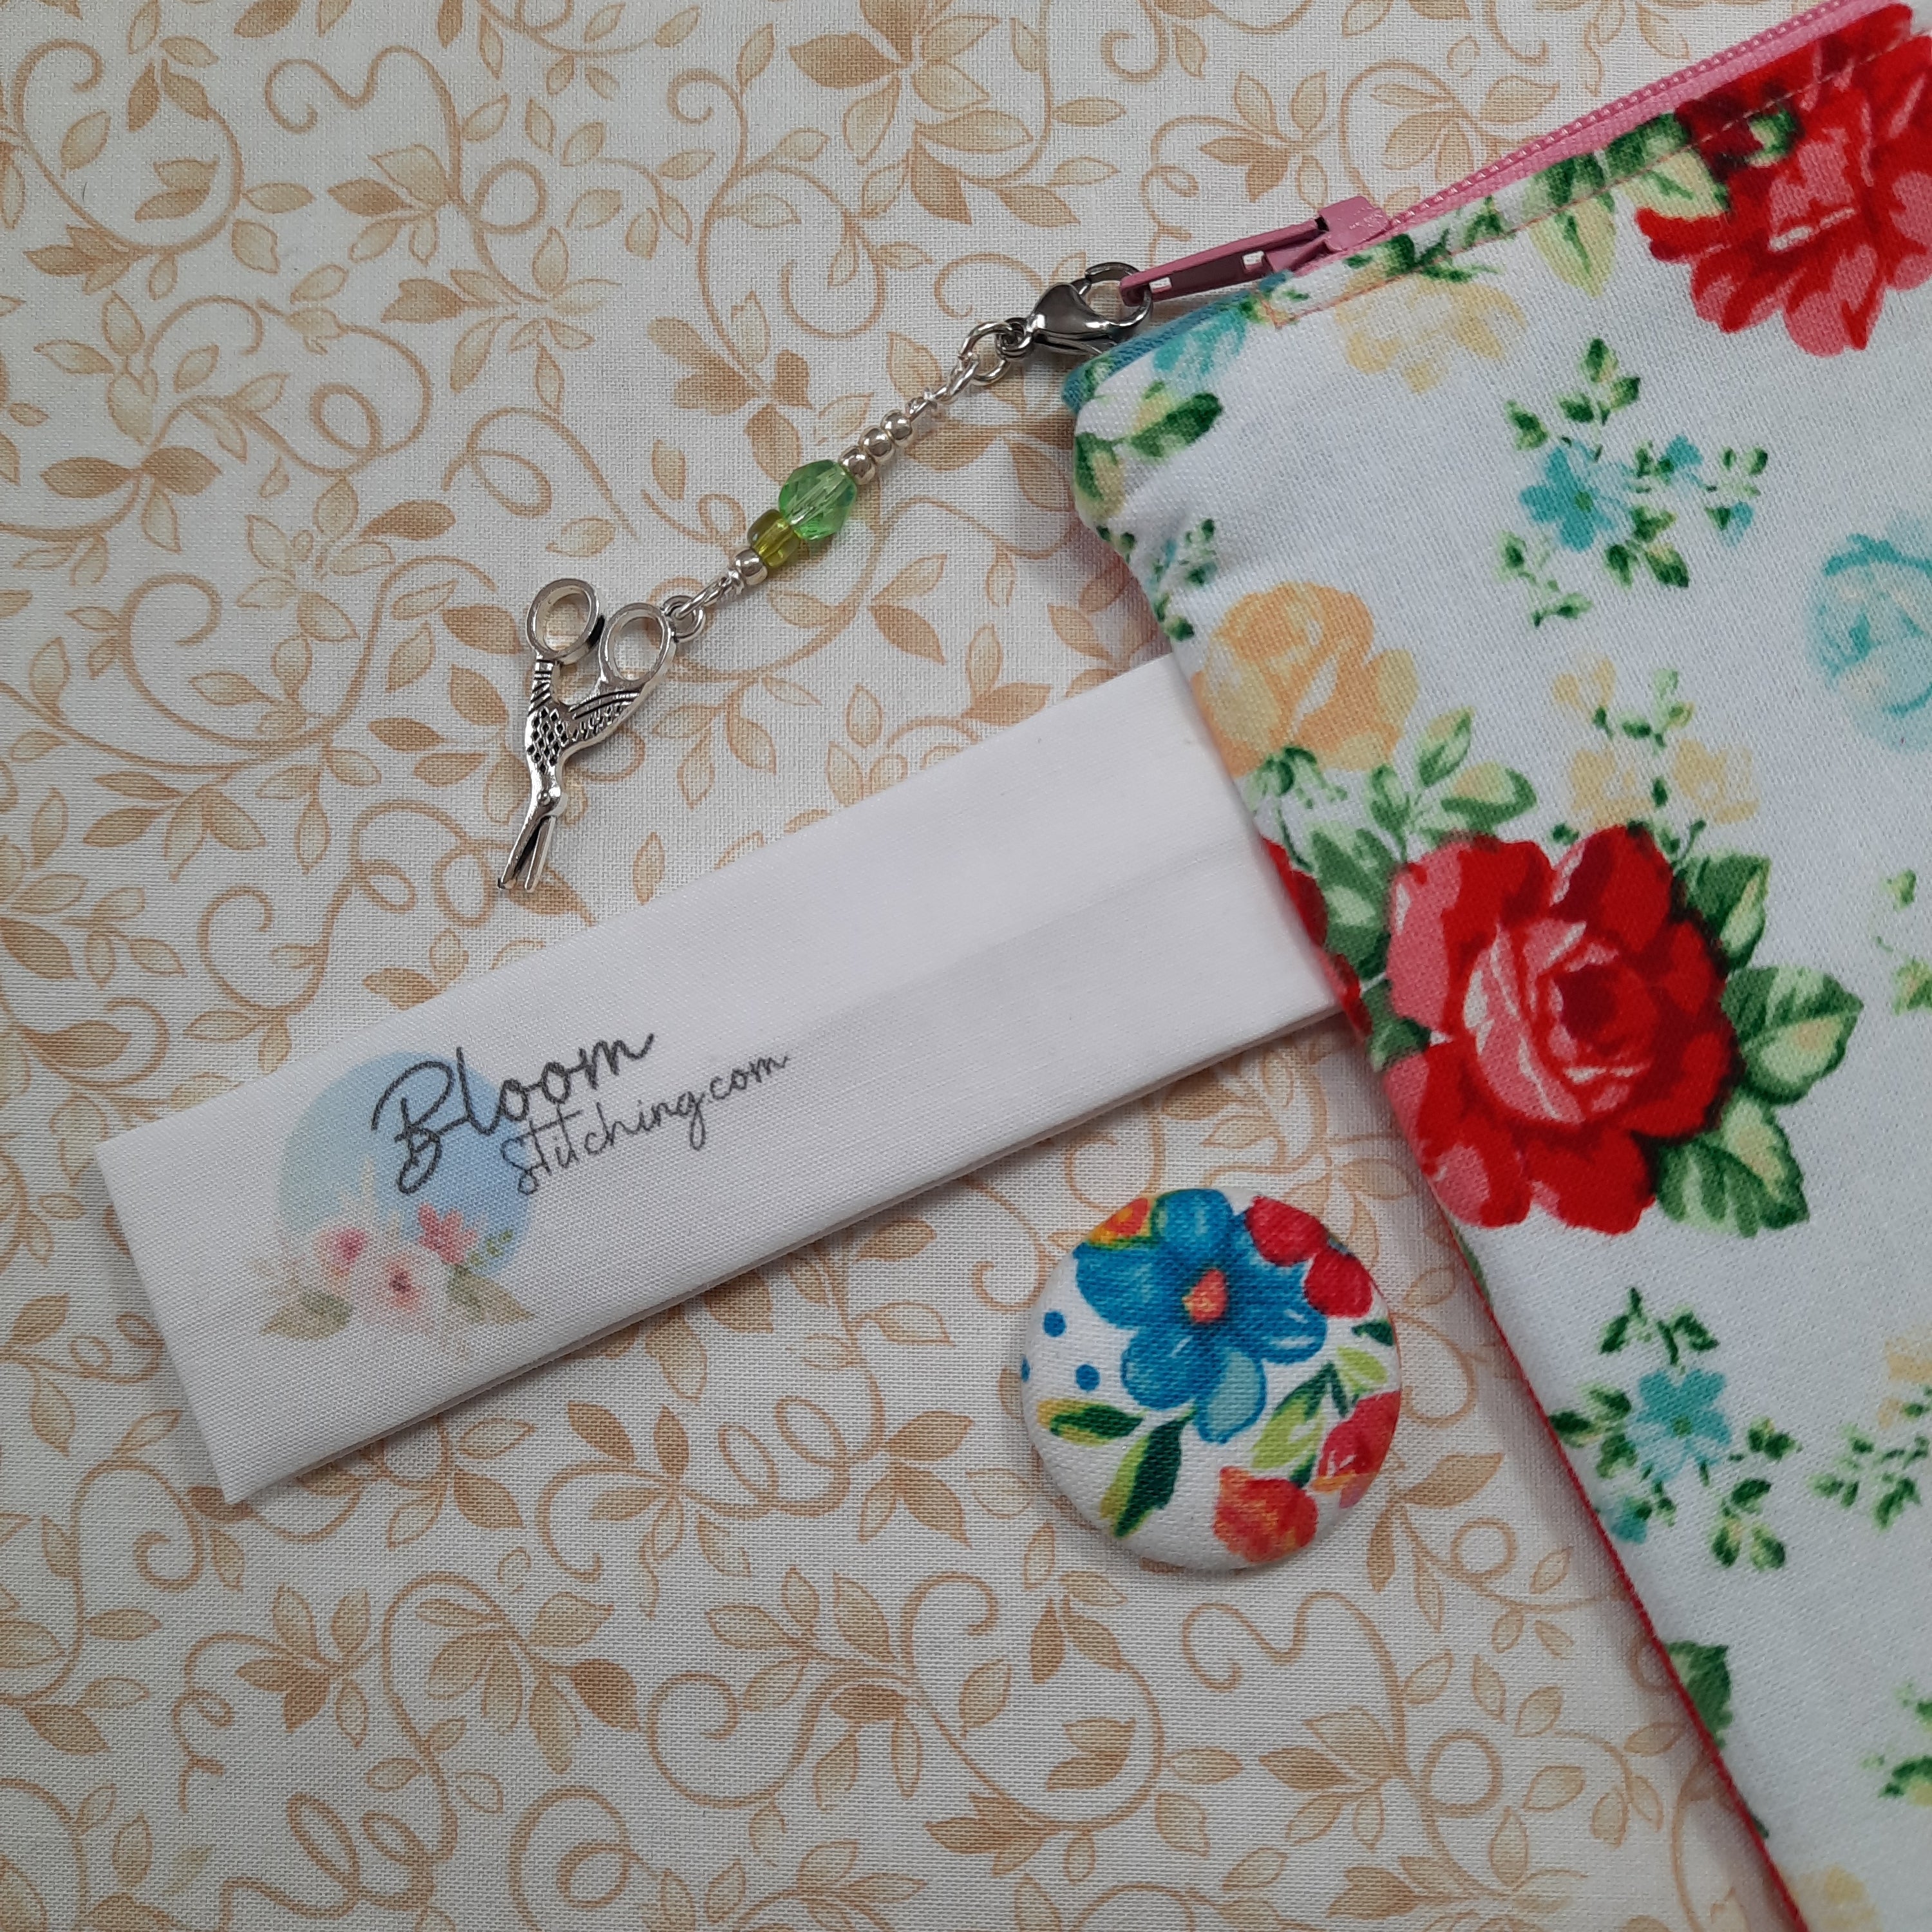 Cross Stitch Project Bag & Needle Minder - Pioneer Woman - Small